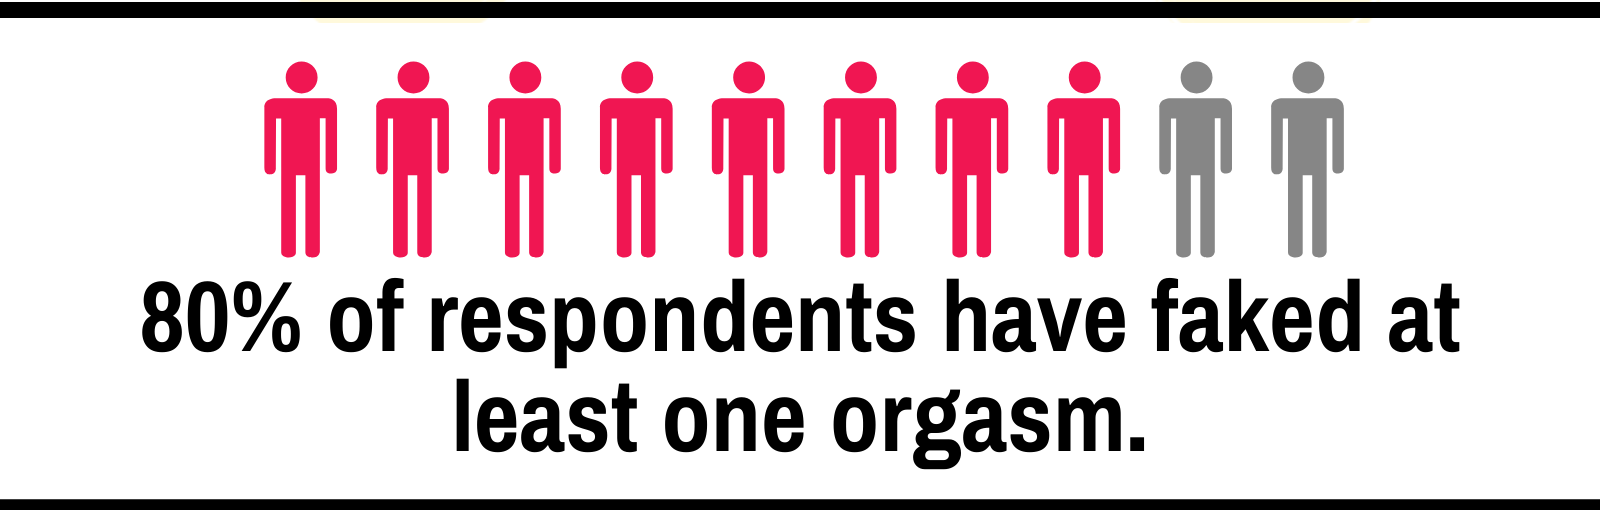 80% of respondents have faked an orgasm